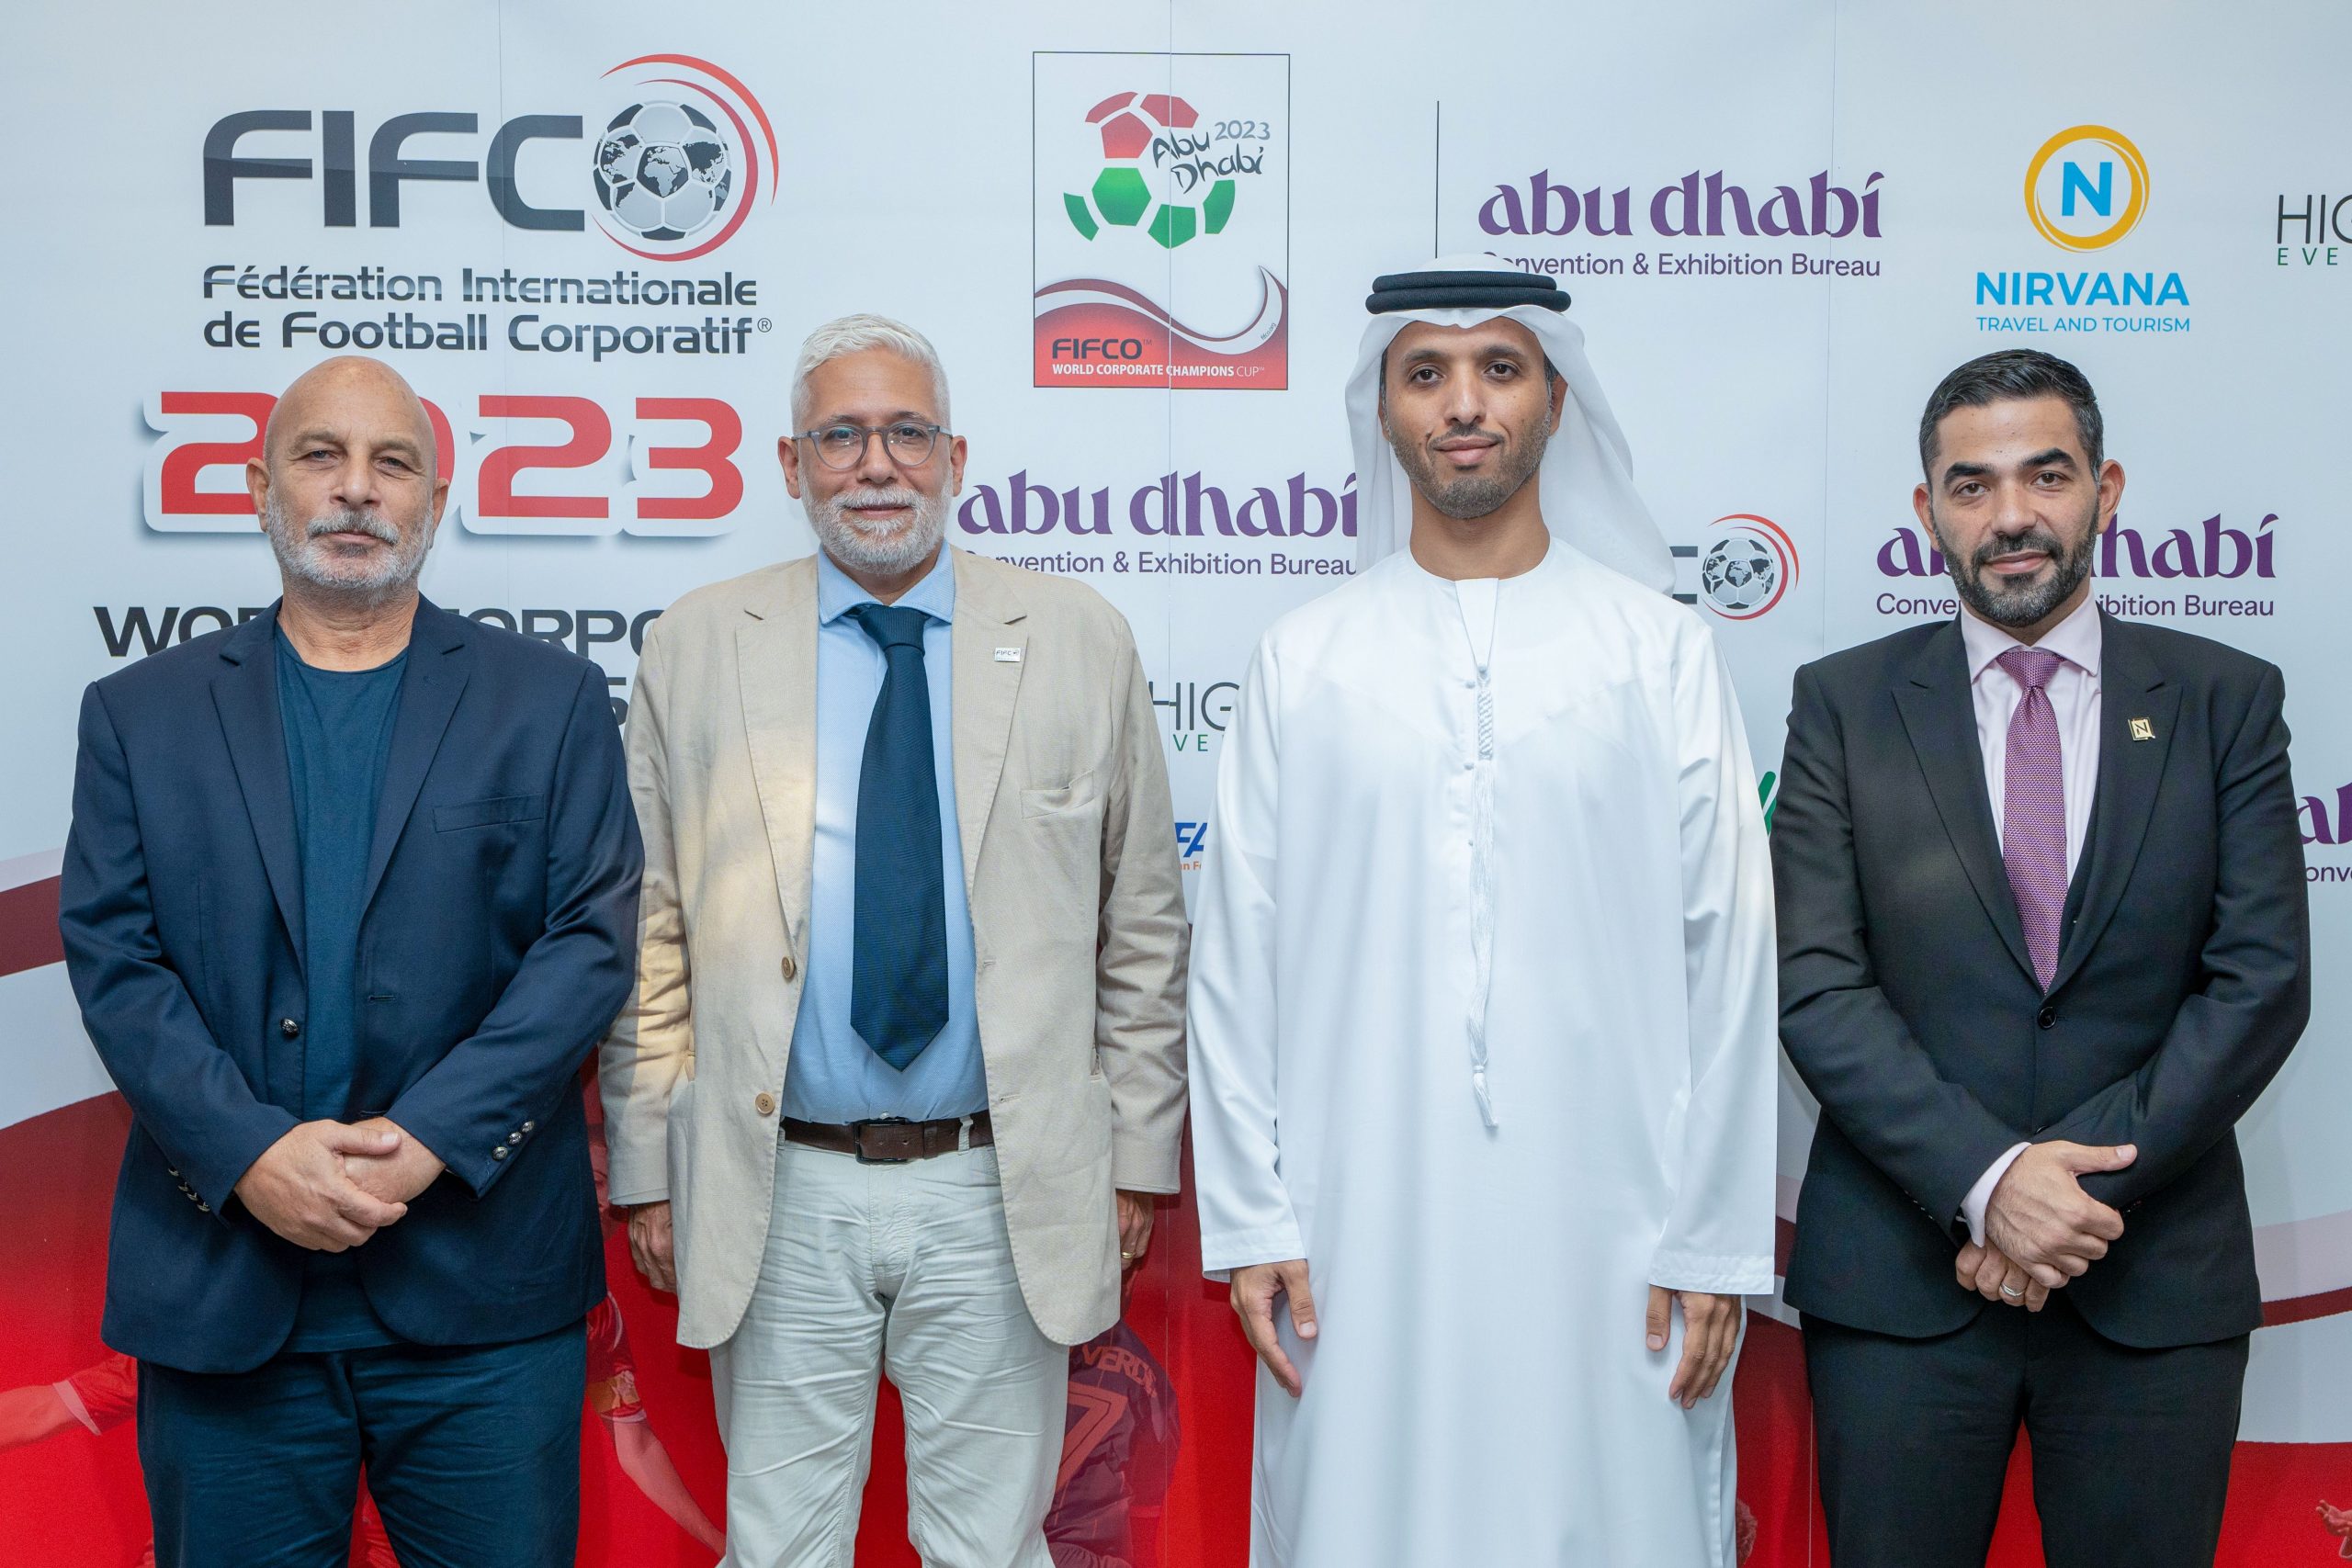 Abu Dhabi to host fifth FIFCO World Corporate Champions Cup